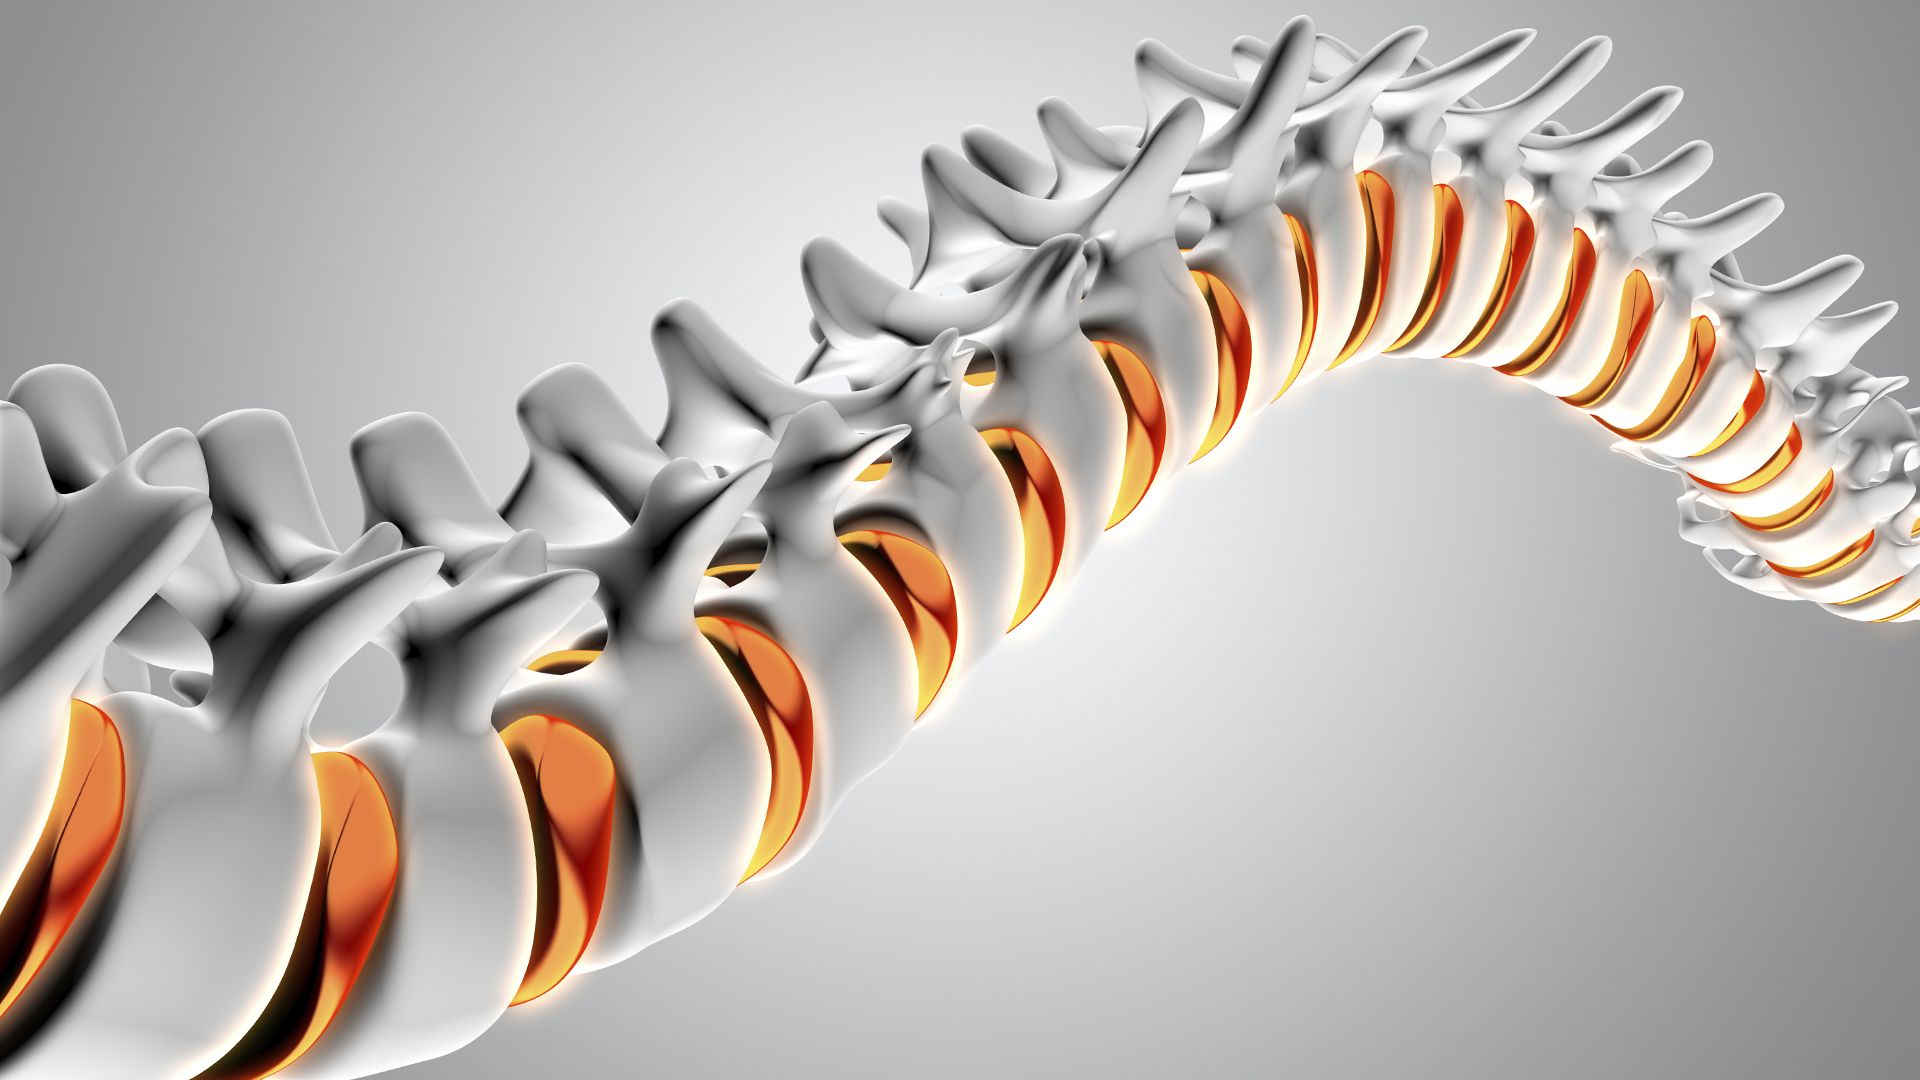 Vertebrae Wallpaper. Vertebrae Wallpaper, Vertebrae Background and